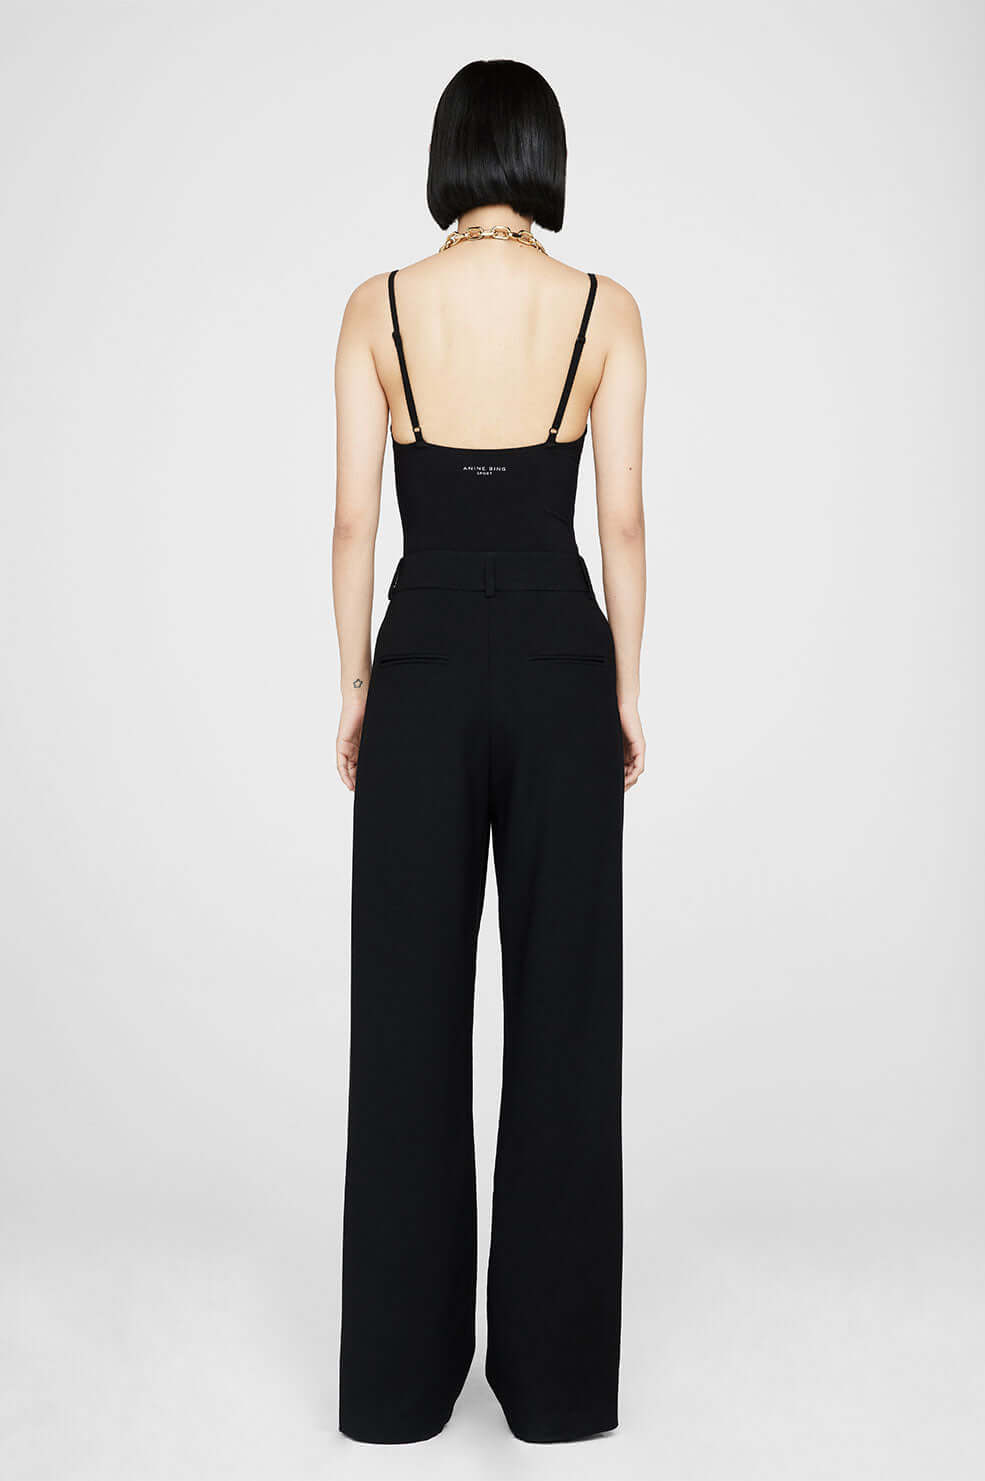  Anine Bing Carrie Twill Pant in Black available at The New Trend